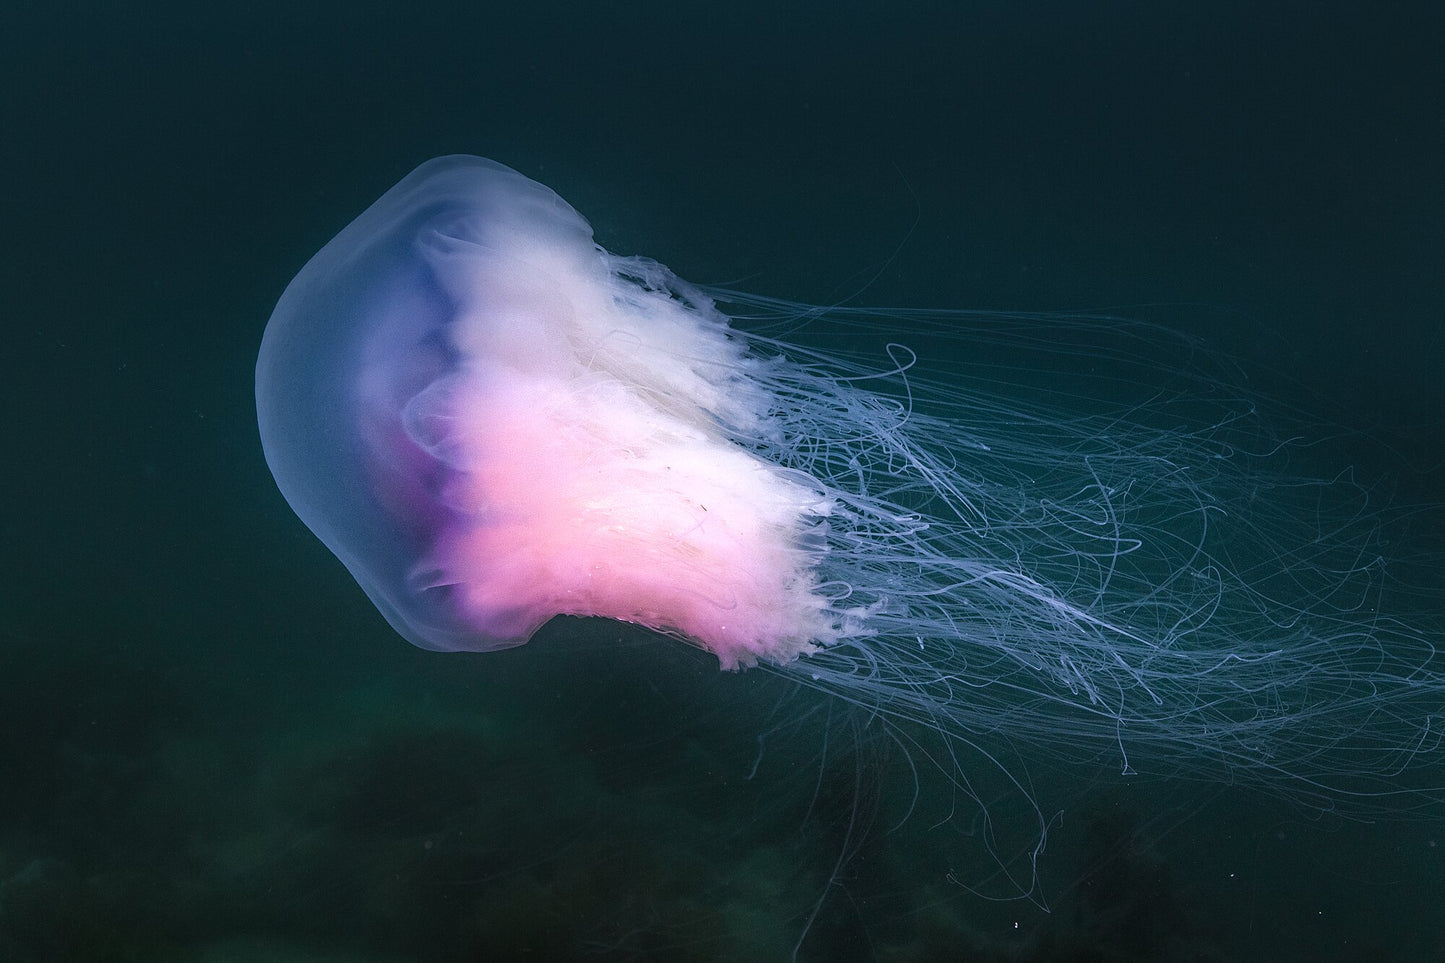 A large jellyfish with violet hues drifts in the Norwegian Sea.